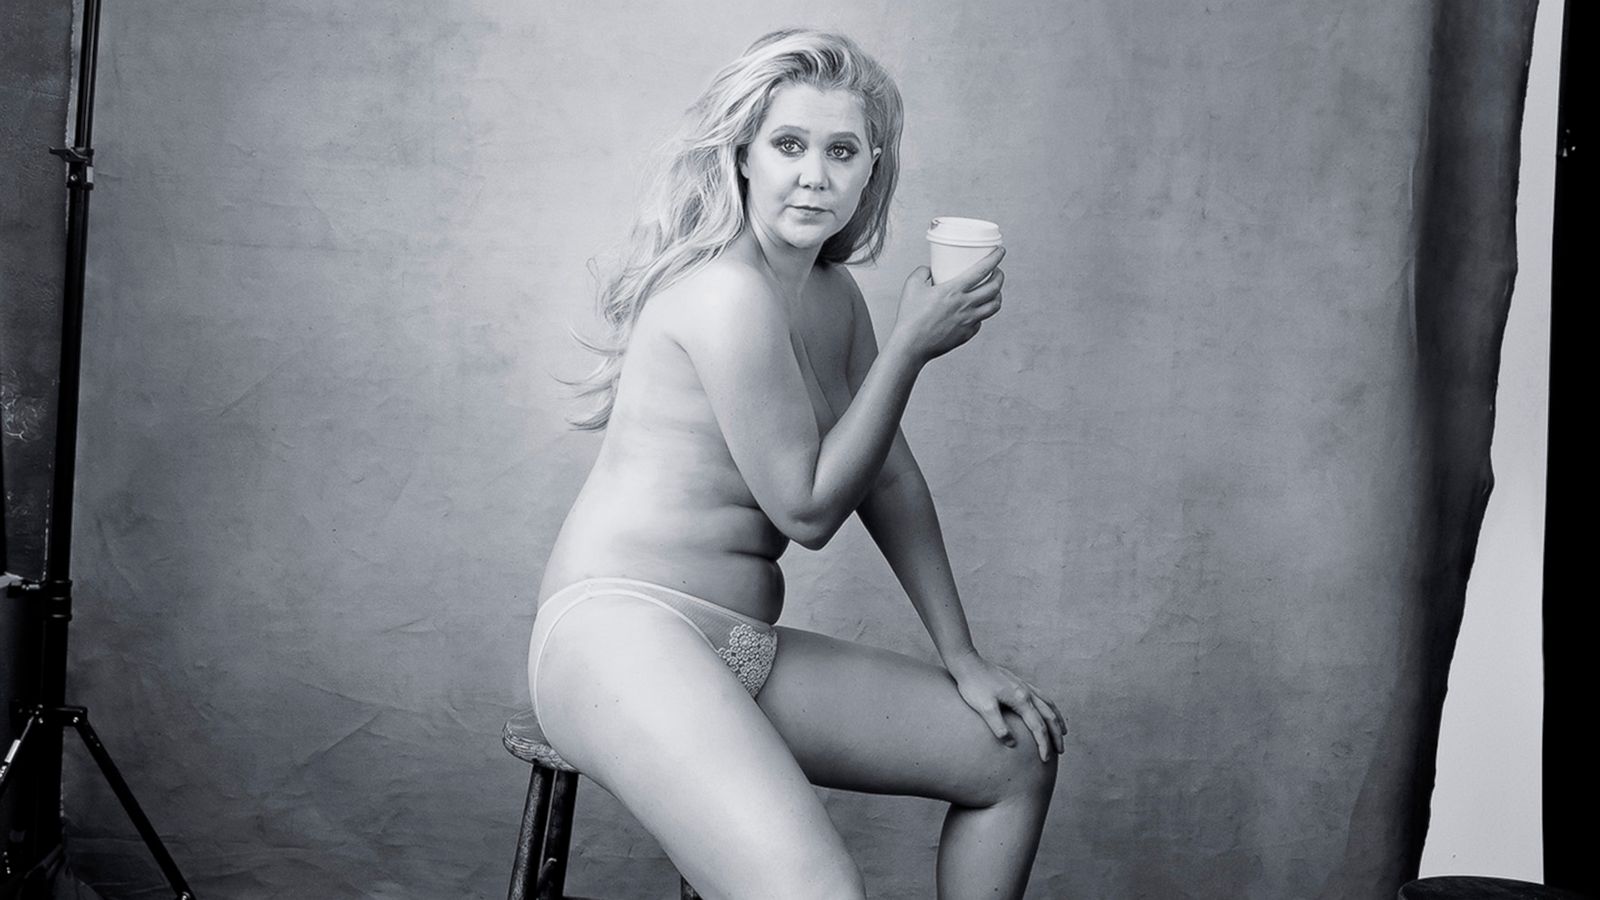 brooke baird share amy schumer naked images photos